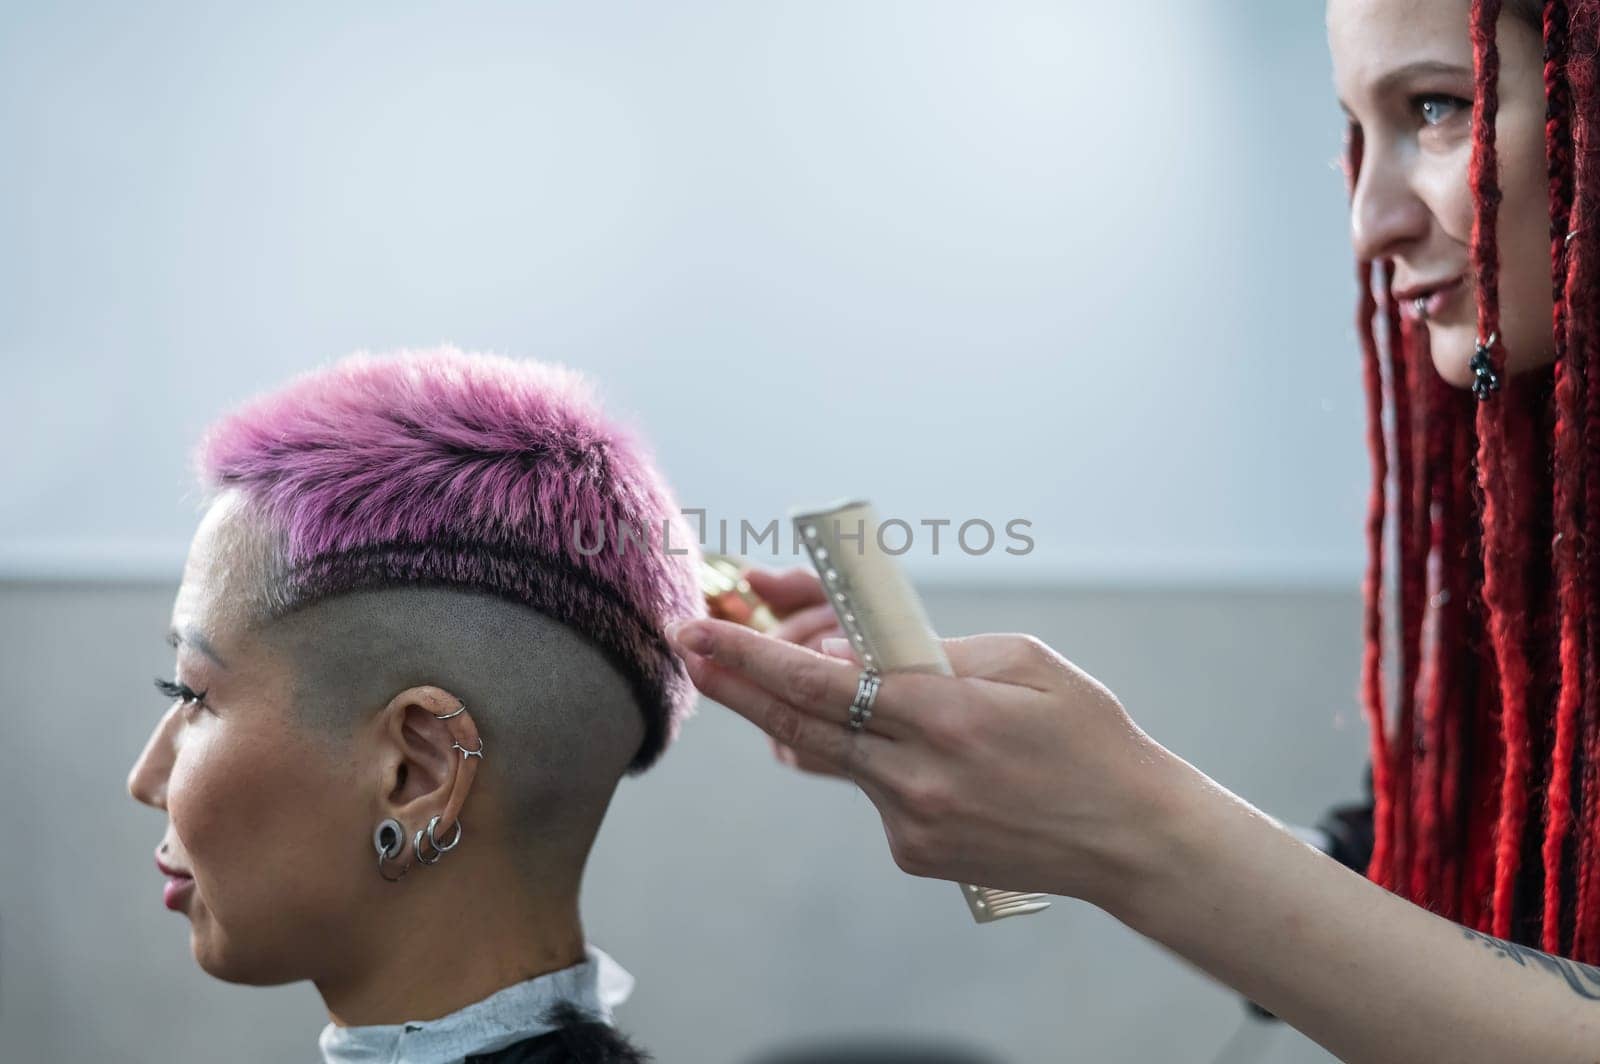 Hairdresser cuts Asian woman with short pink hair in barbershop. by mrwed54